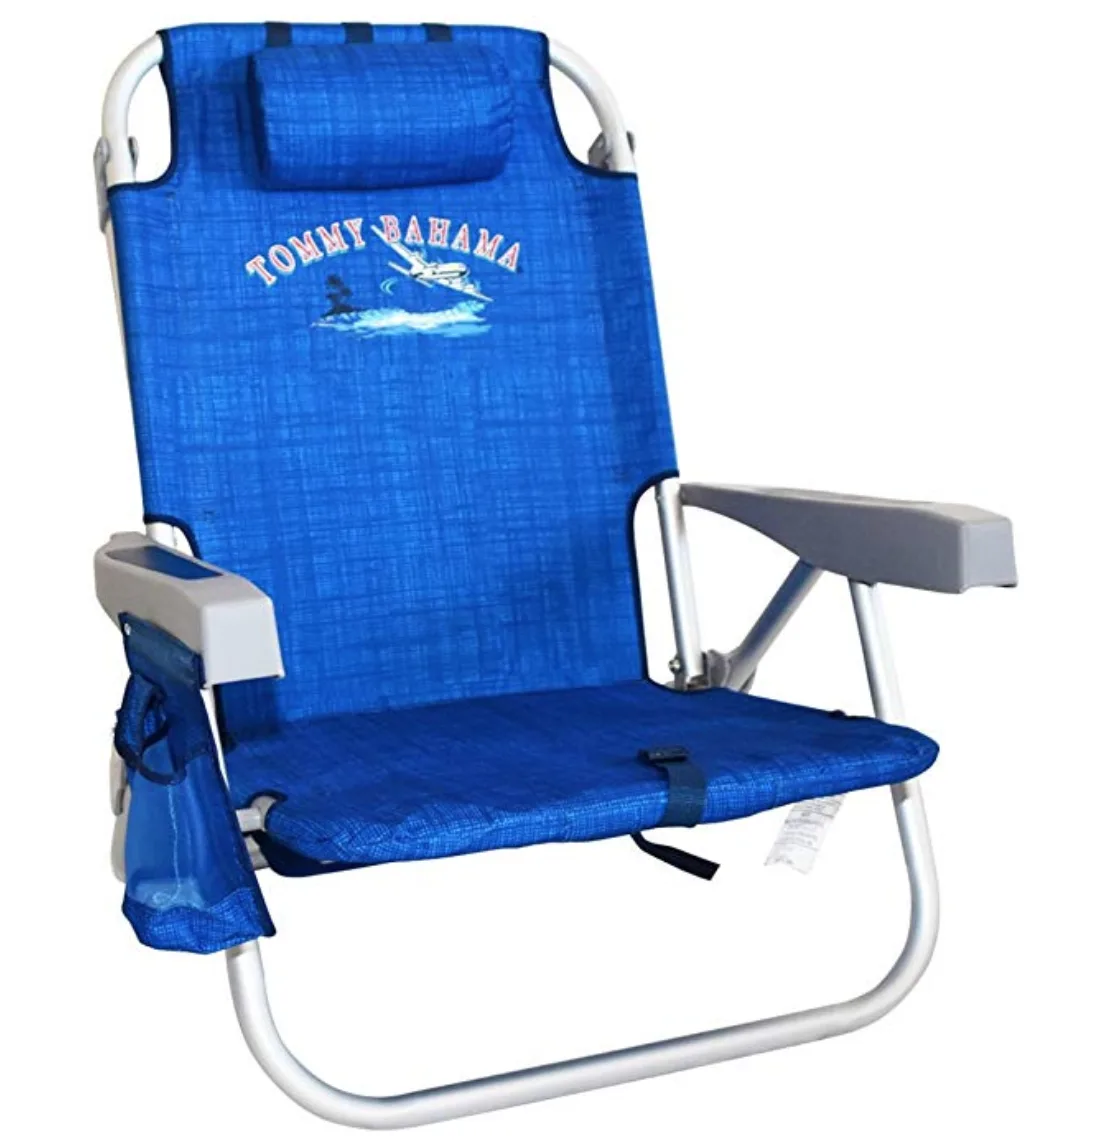 Tommy Bahama Backpack Cooler Camping Chair